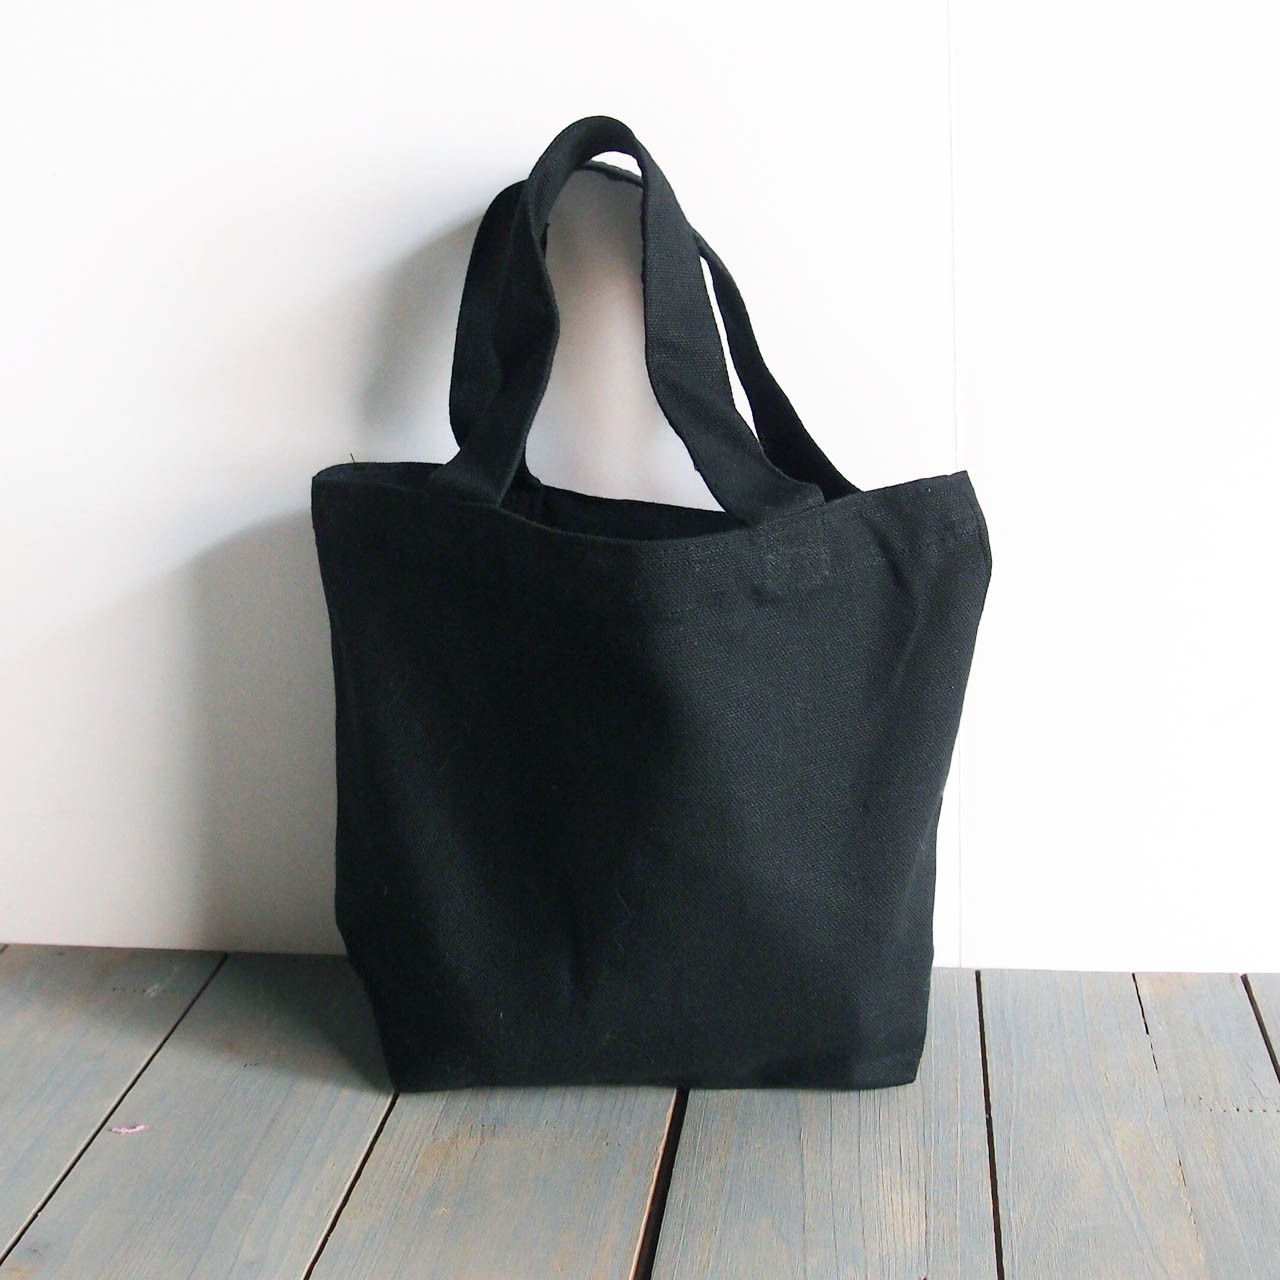 Small Cotton Canvas Tote Bag Black with Black Handles 9 1/2” W x 8” H x 3” Gusset